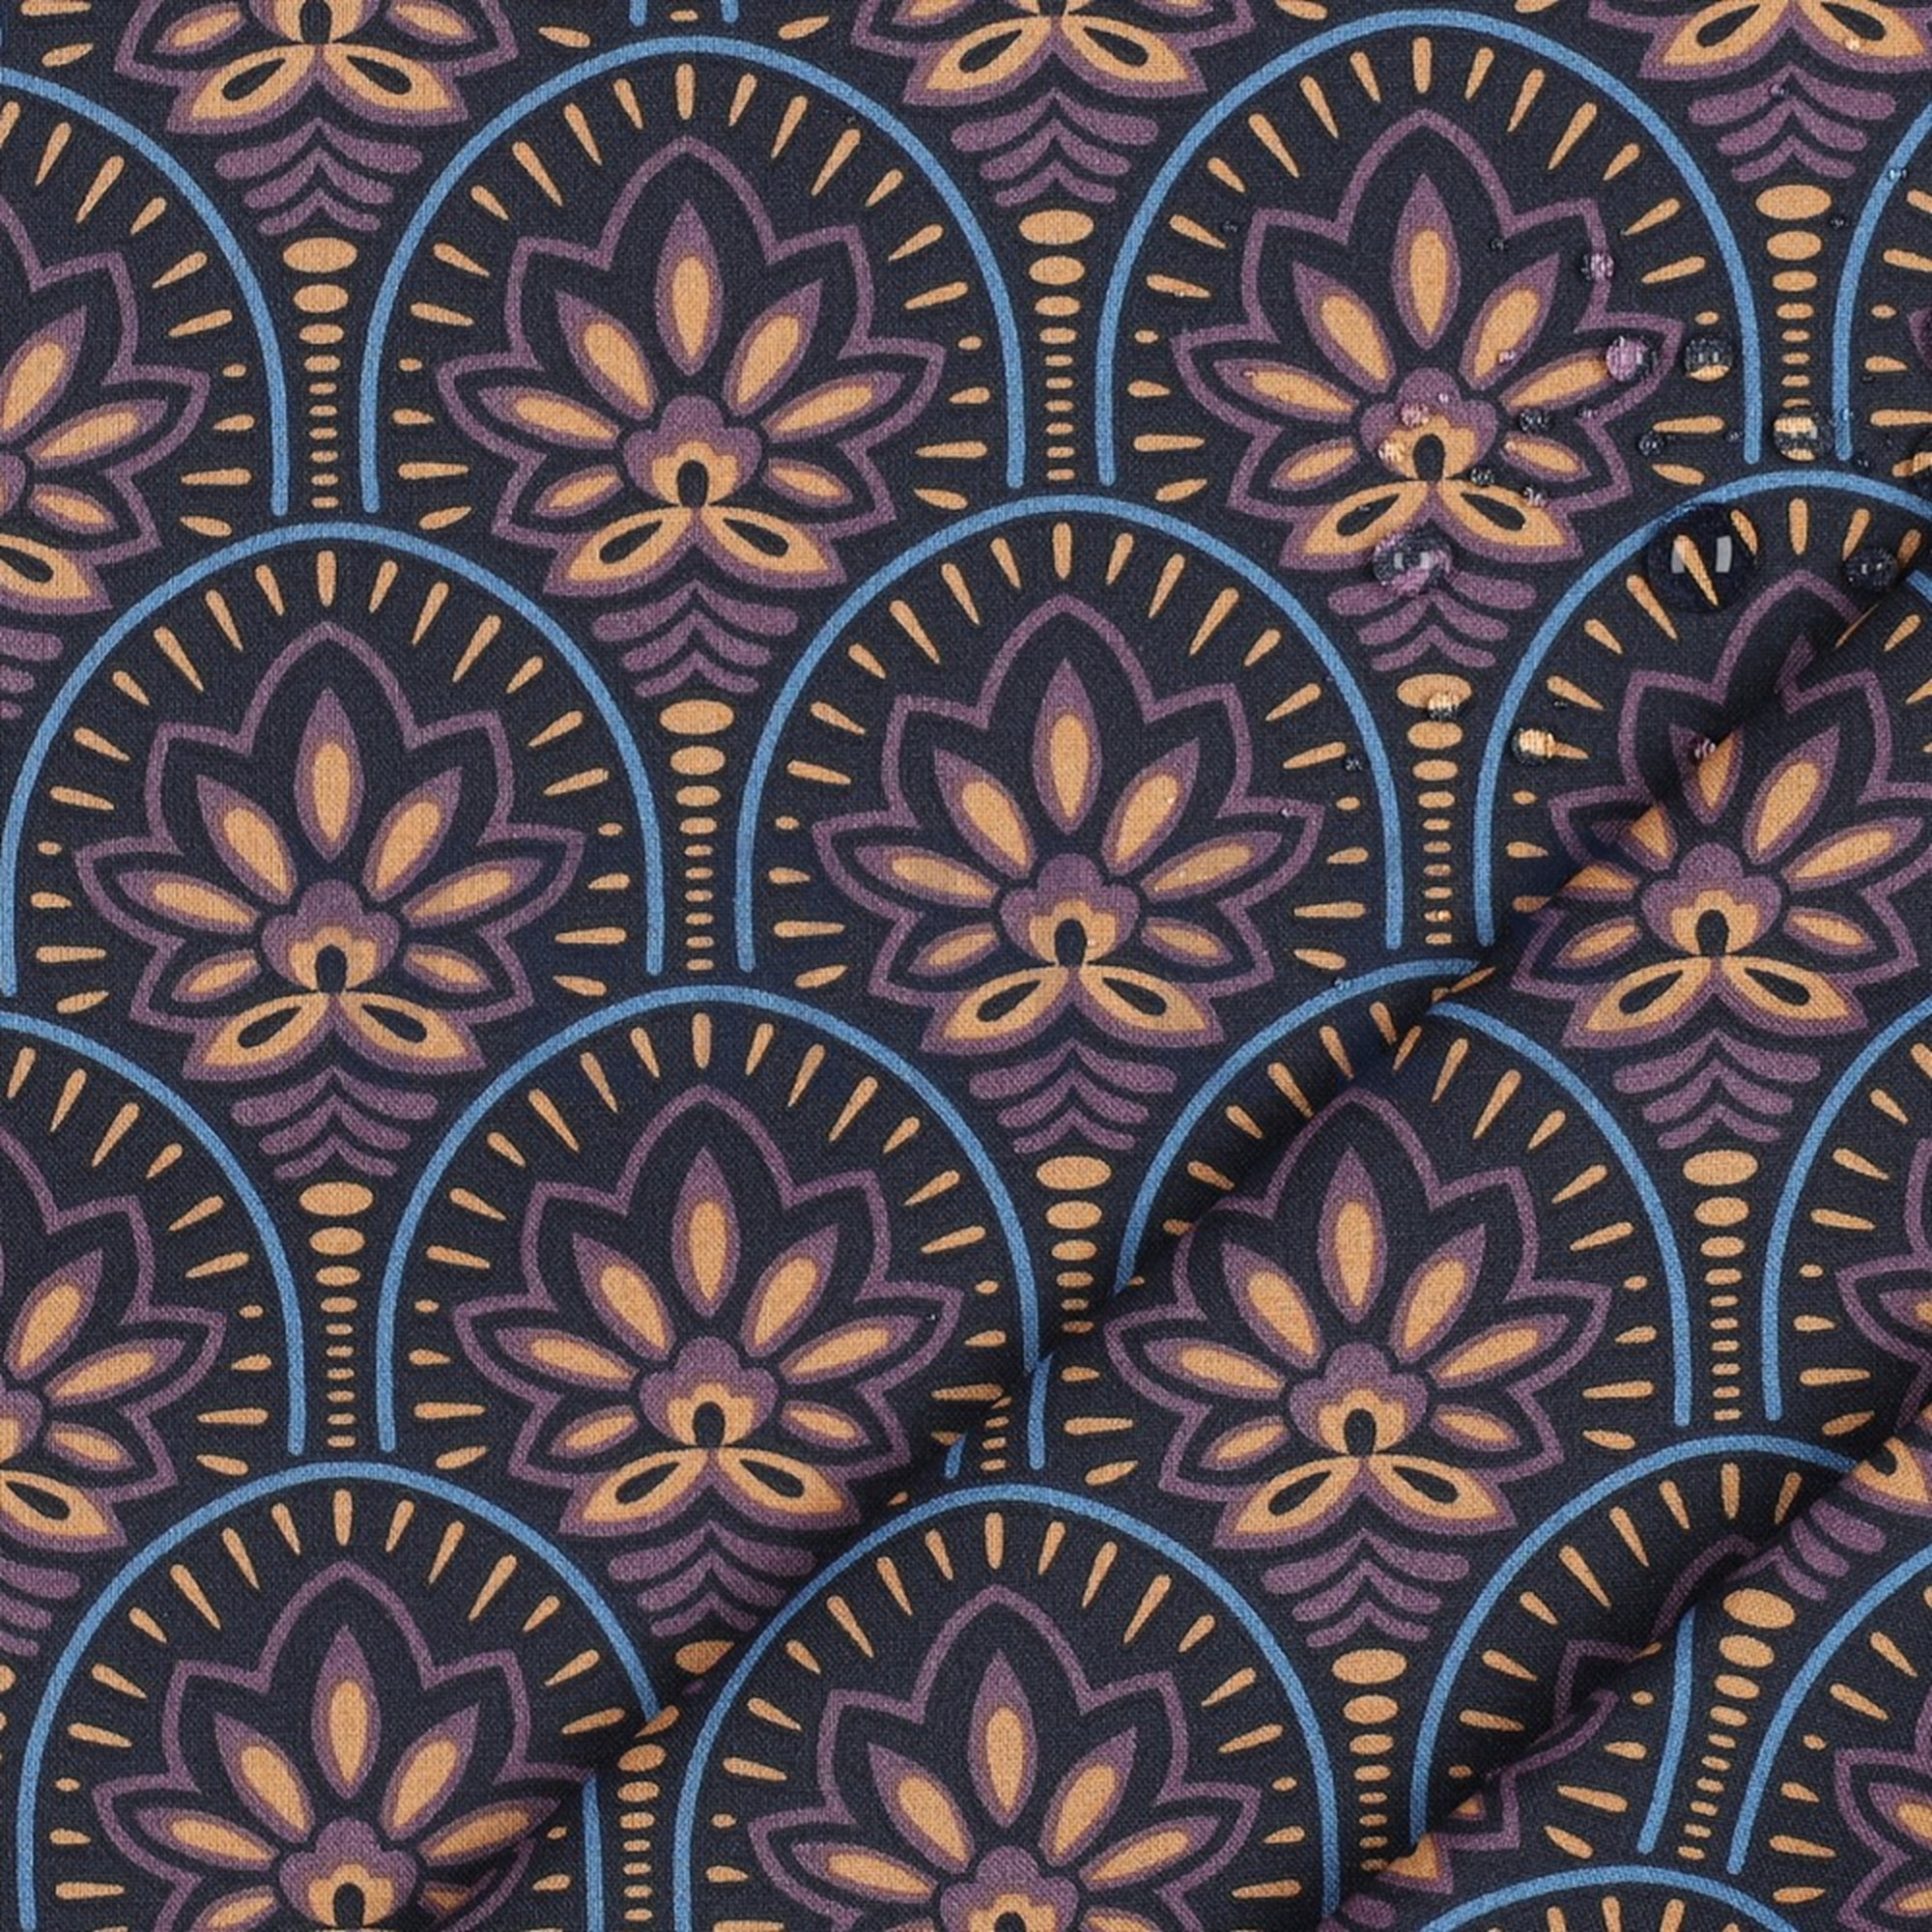 COATED COTTON ABSTRACT NAVY (high resolution) #3